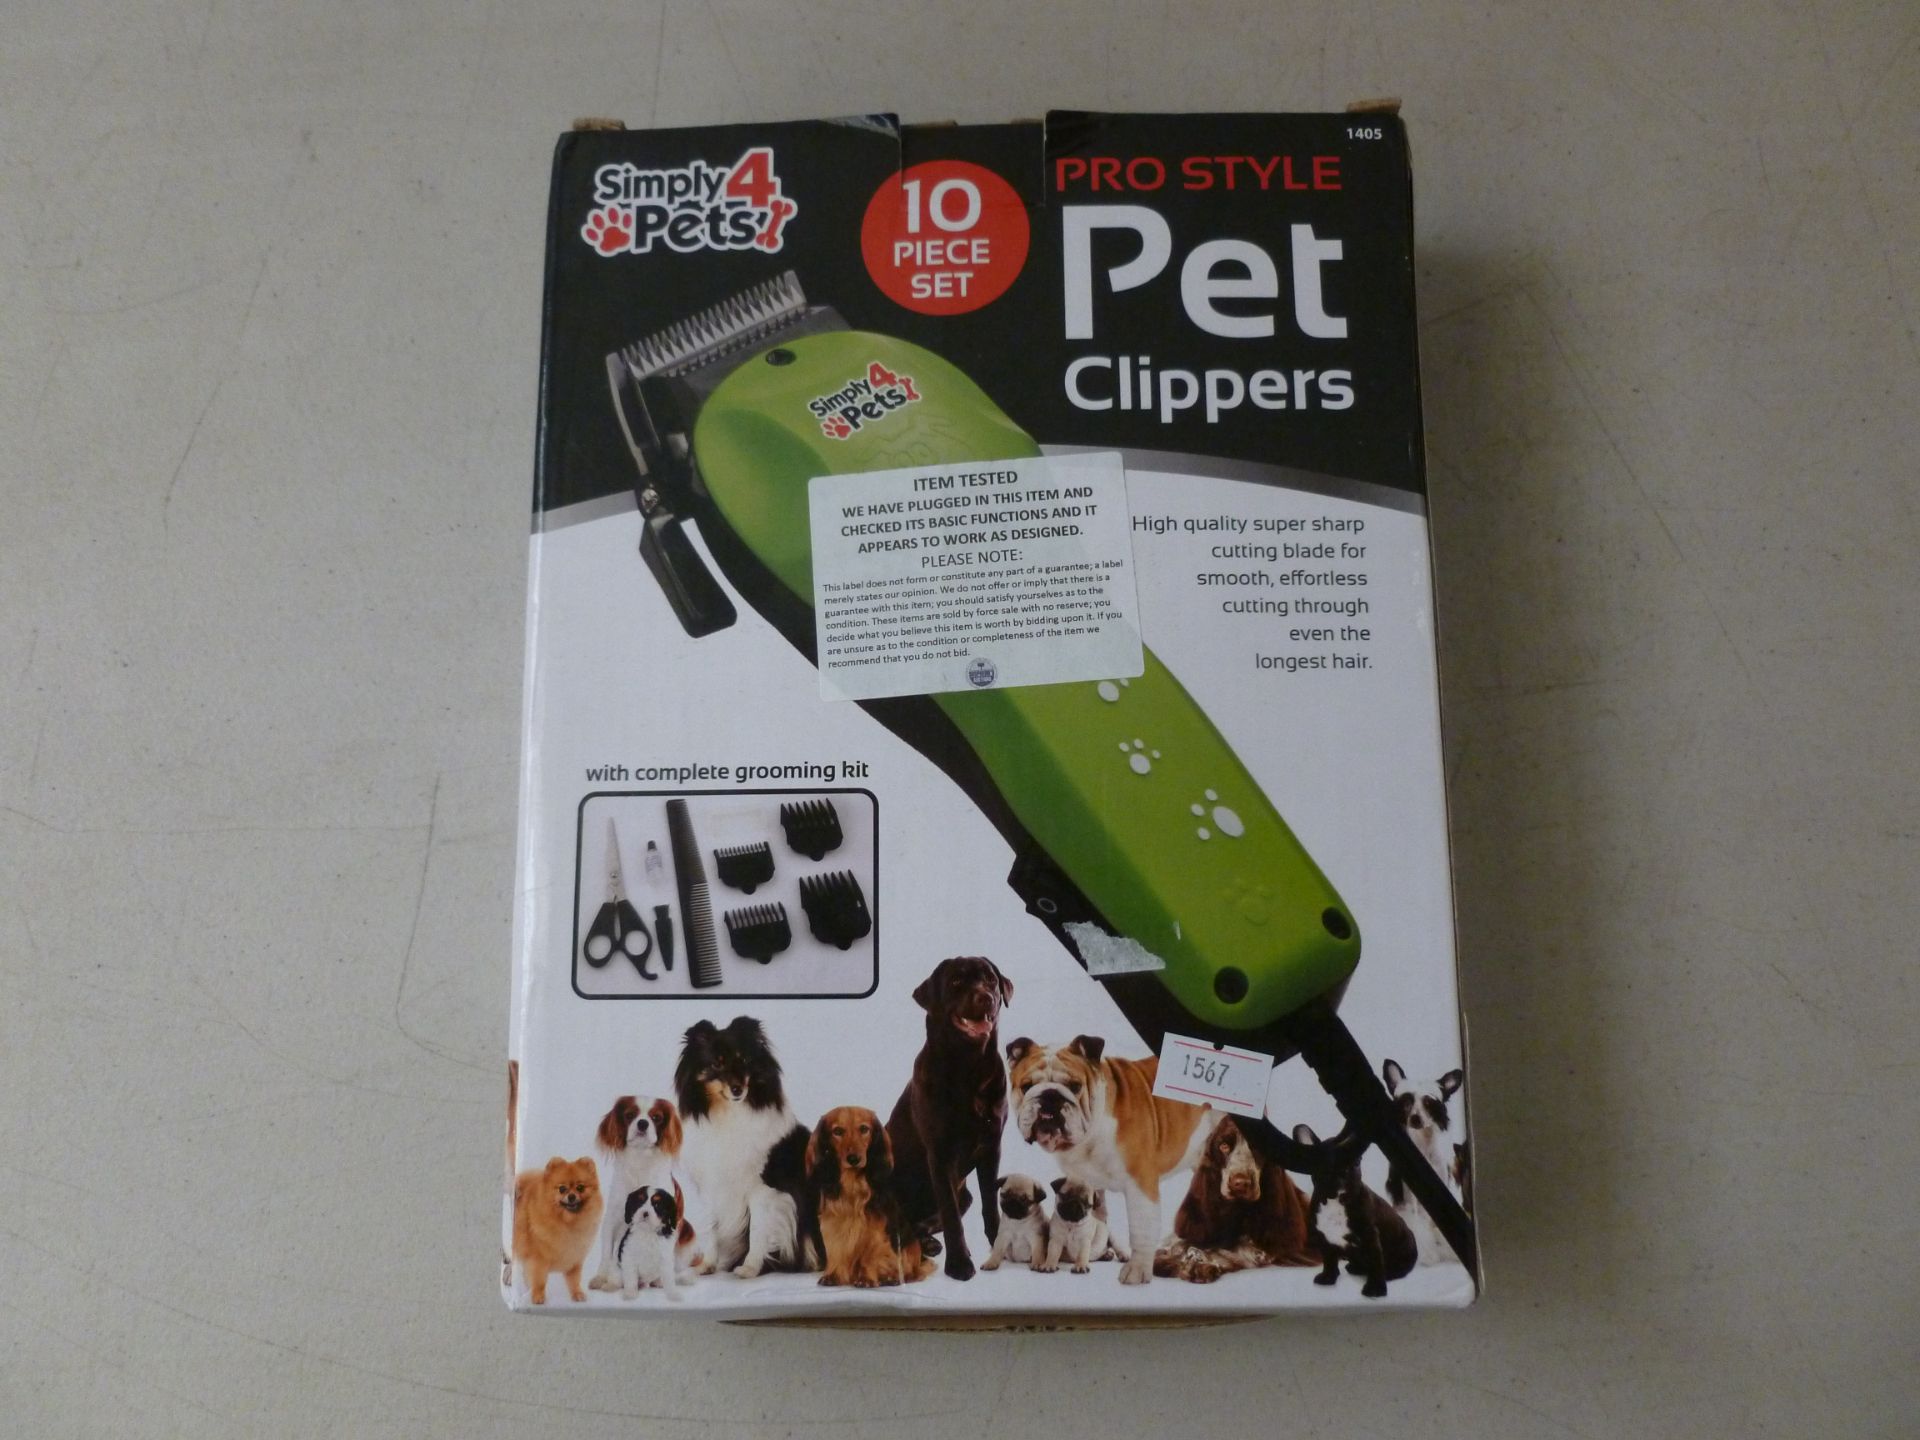 Simply 4 Pets pro style pet clippers, tested working and boxed.